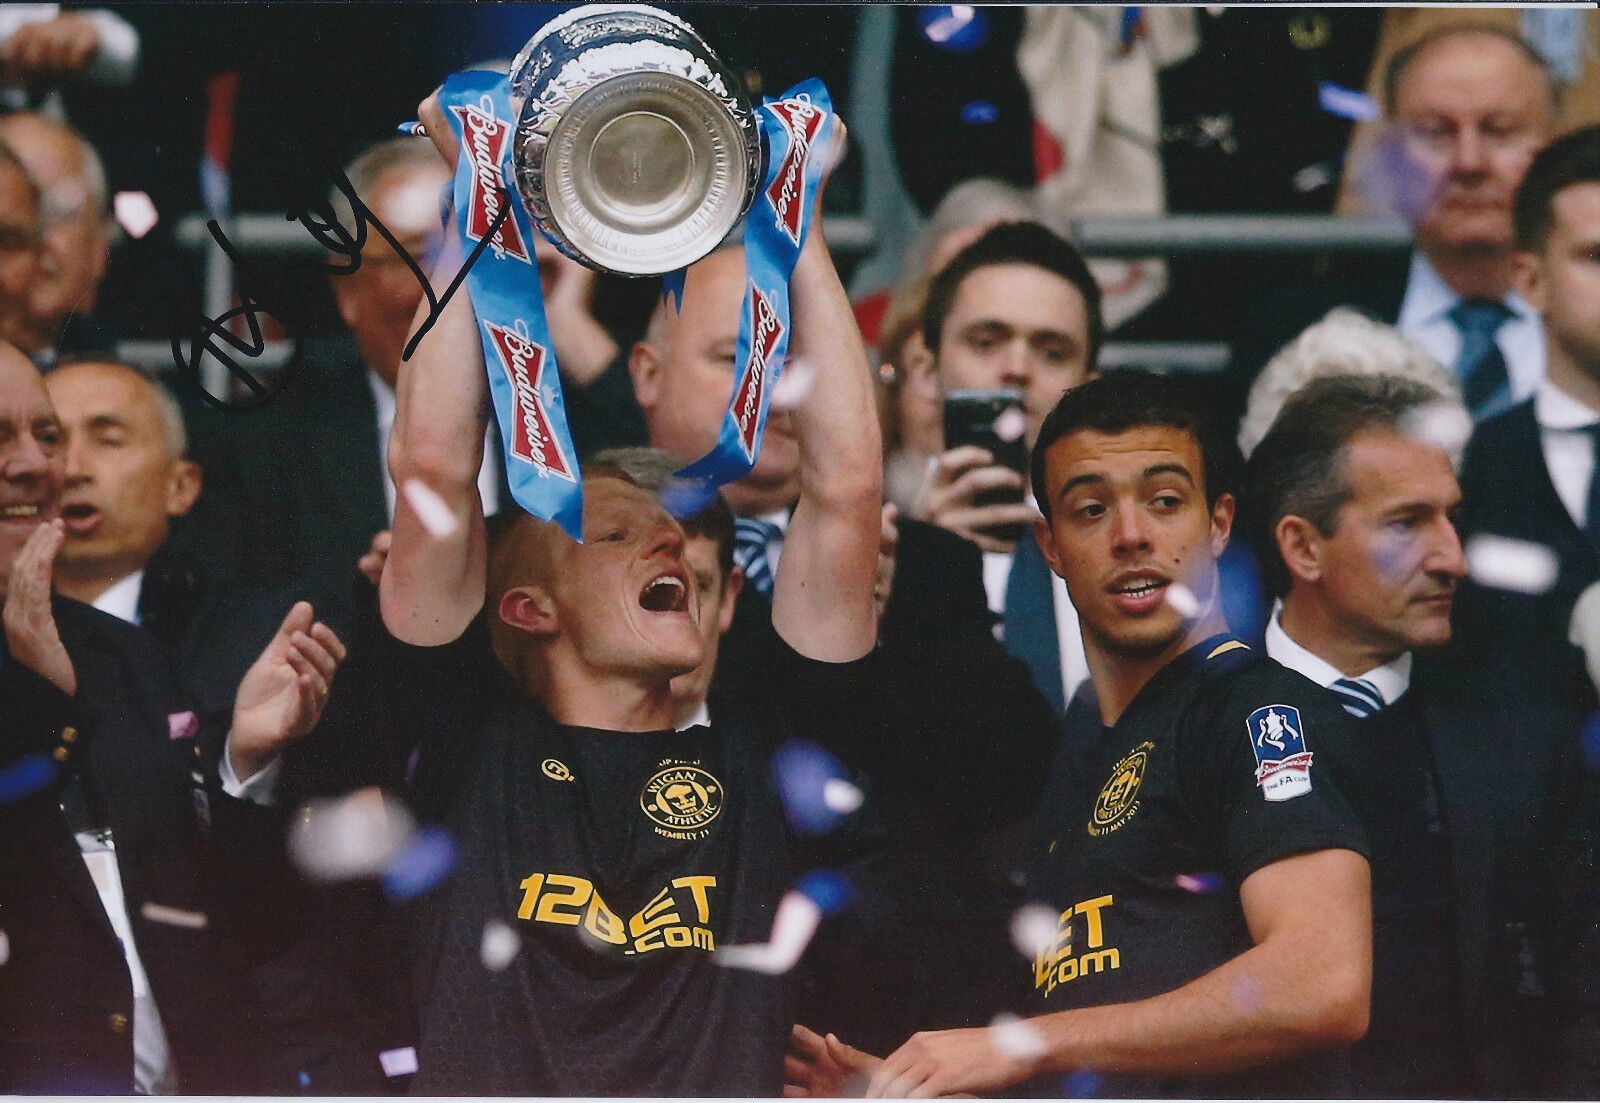 Ben WATSON SIGNED Autograph 12x8 Photo Poster painting AFTAL COA Wigan Holds FA Cup Aloft